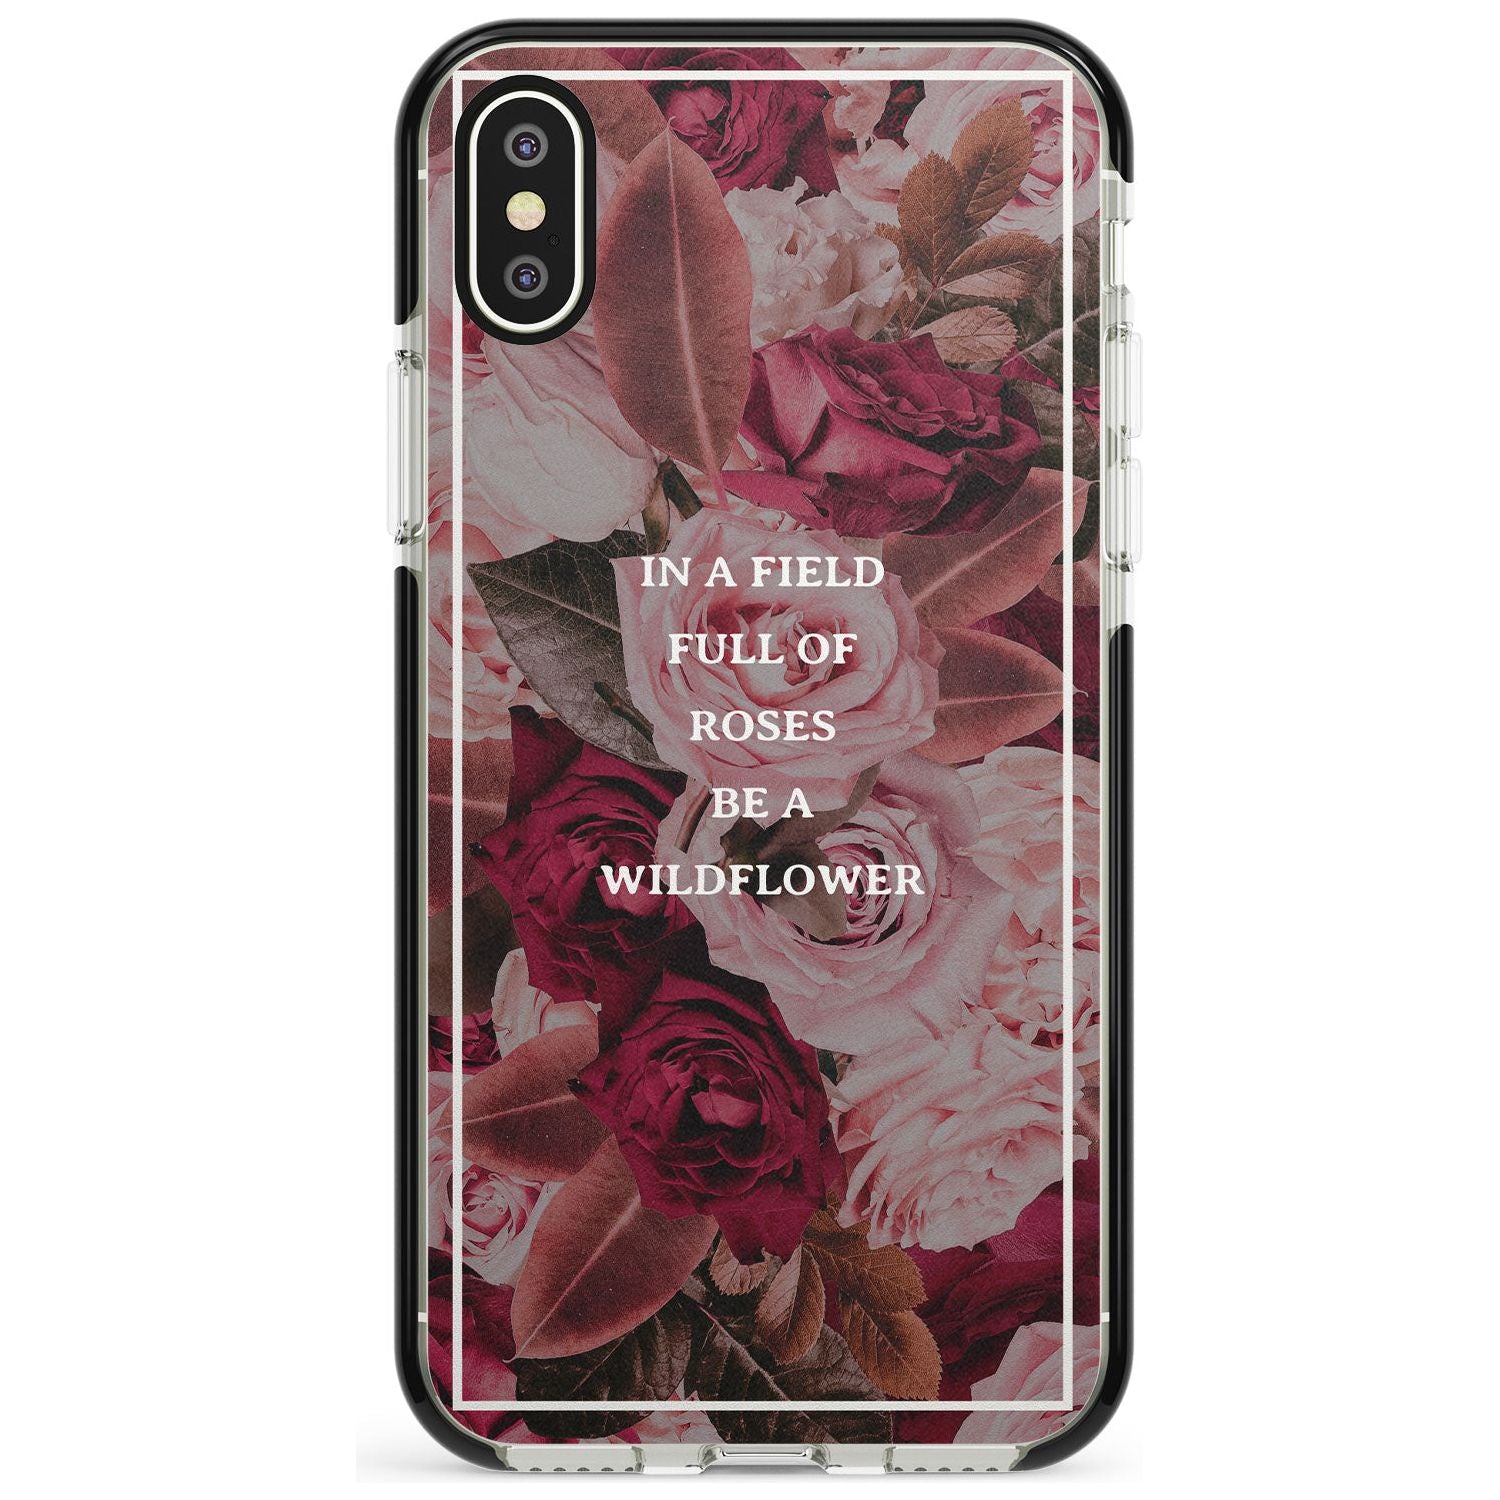 Be a Wildflower Floral Quote Black Impact Phone Case for iPhone X XS Max XR